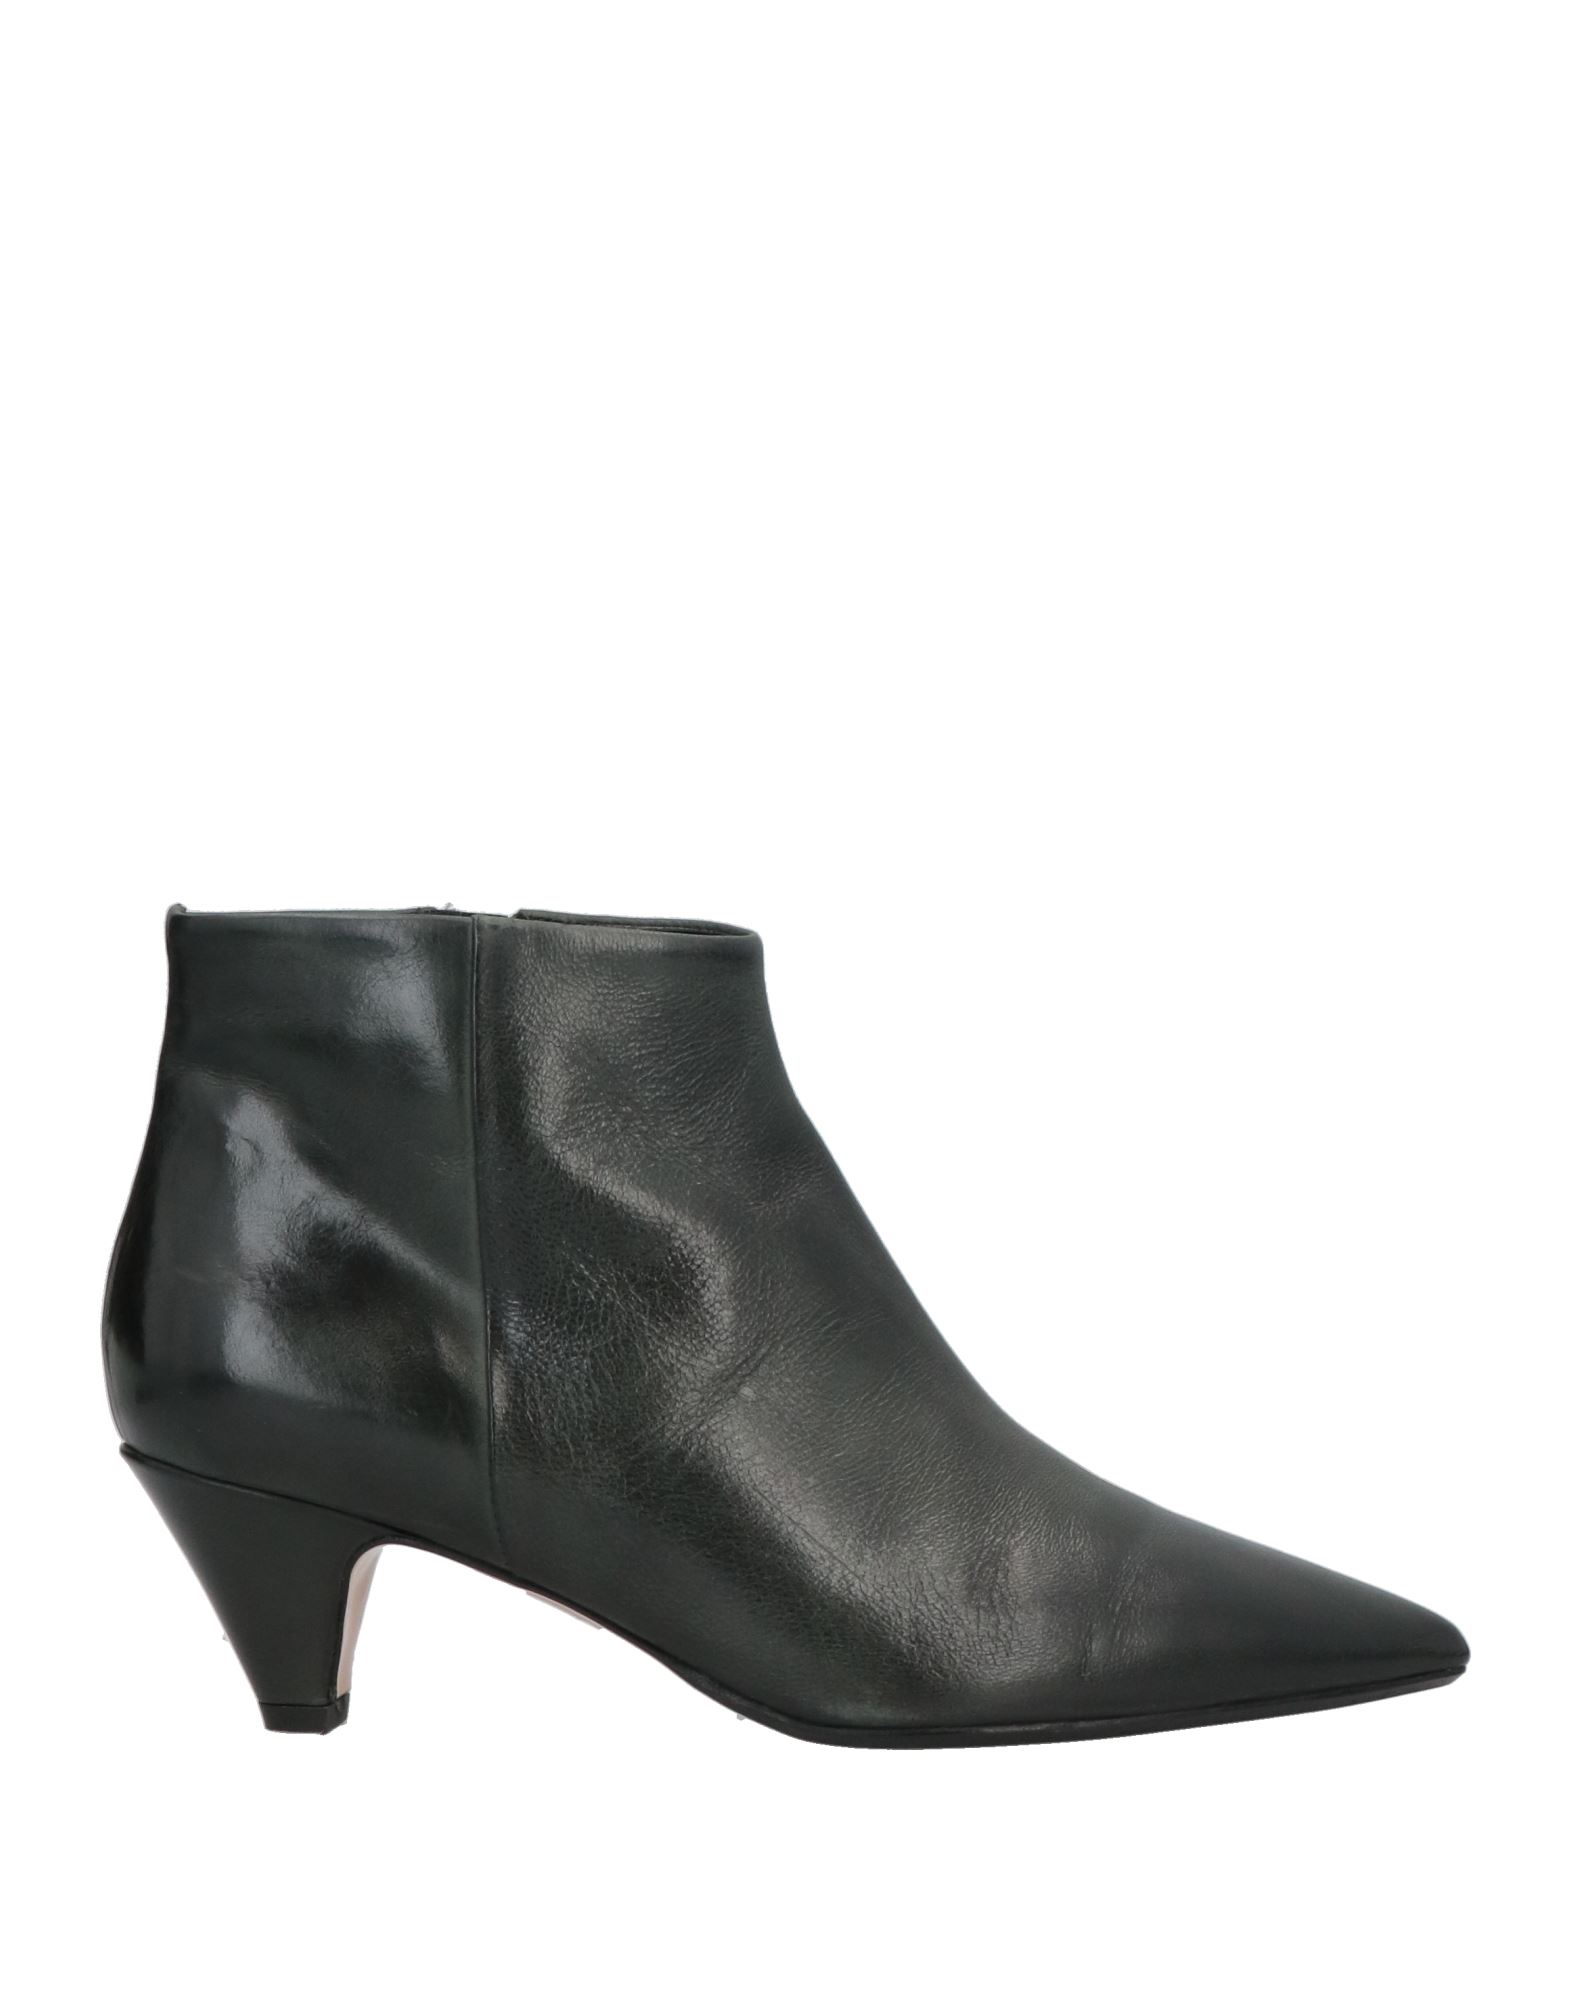 By A. Ankle Boots In Dark Green